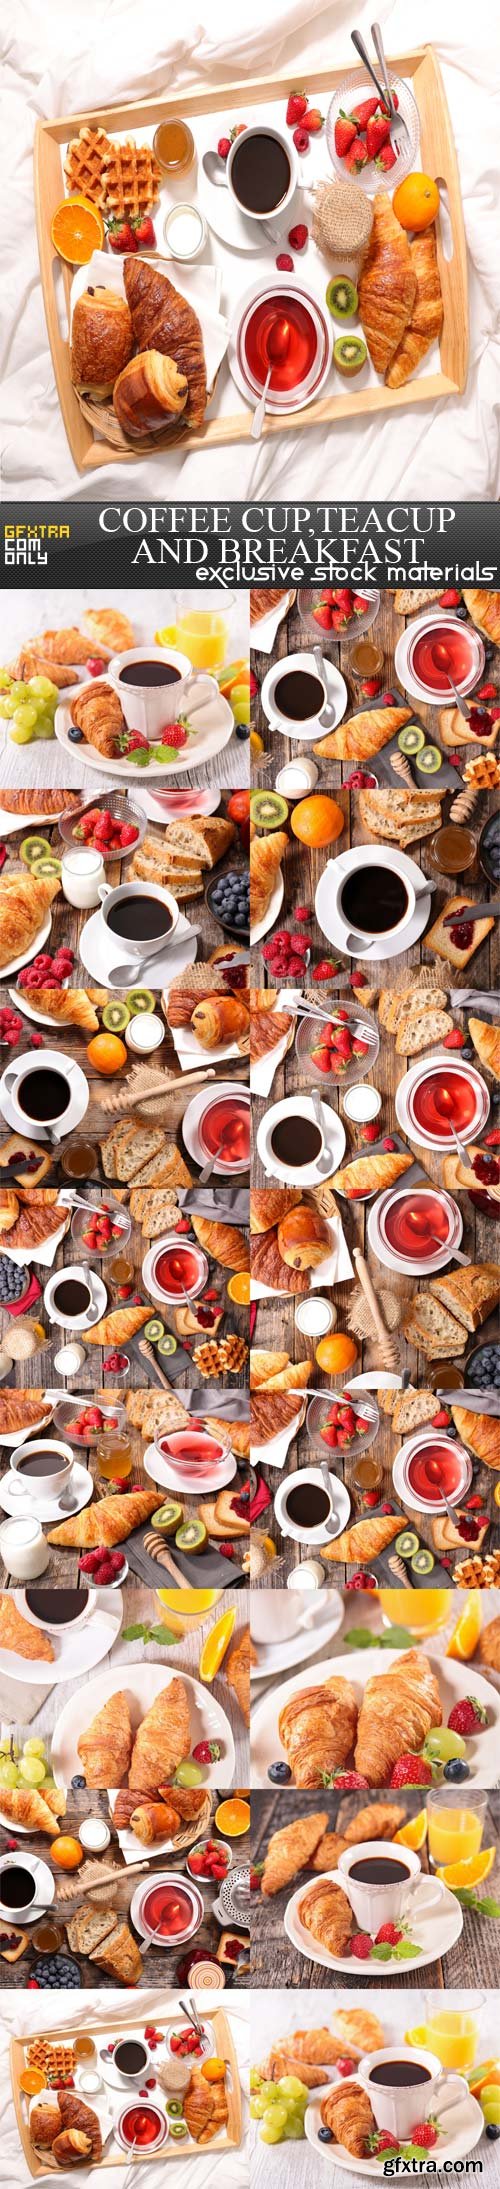 Сoffee cup,teacup and breakfast, 15 UHQ JPEG